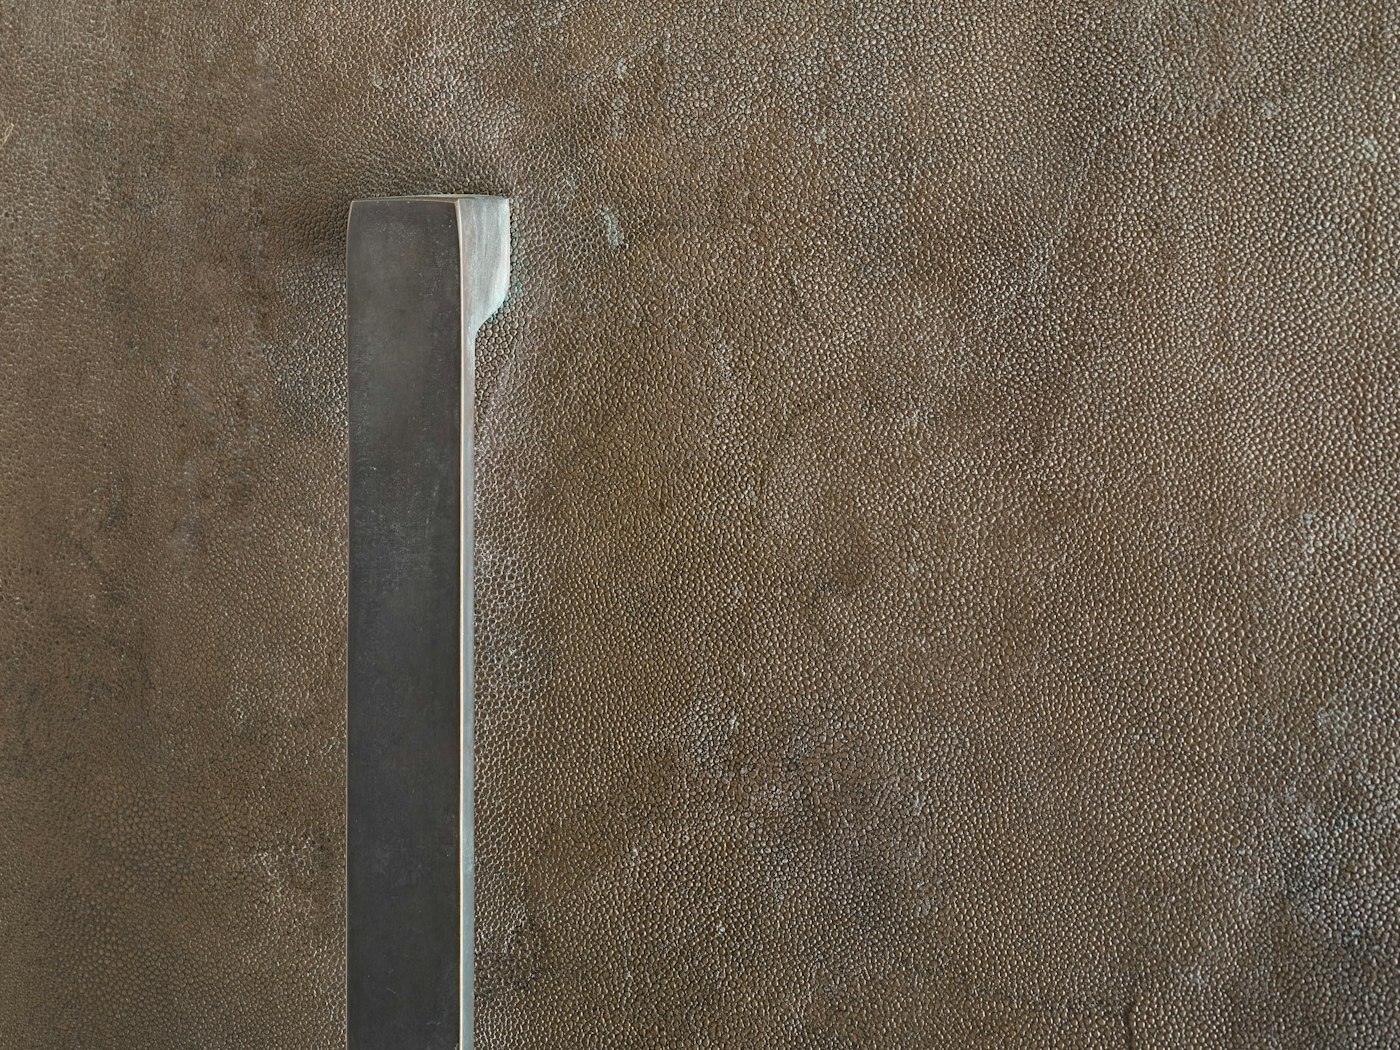 Our BZ11 solid bronze handle is perfectly complementary to the textured finish